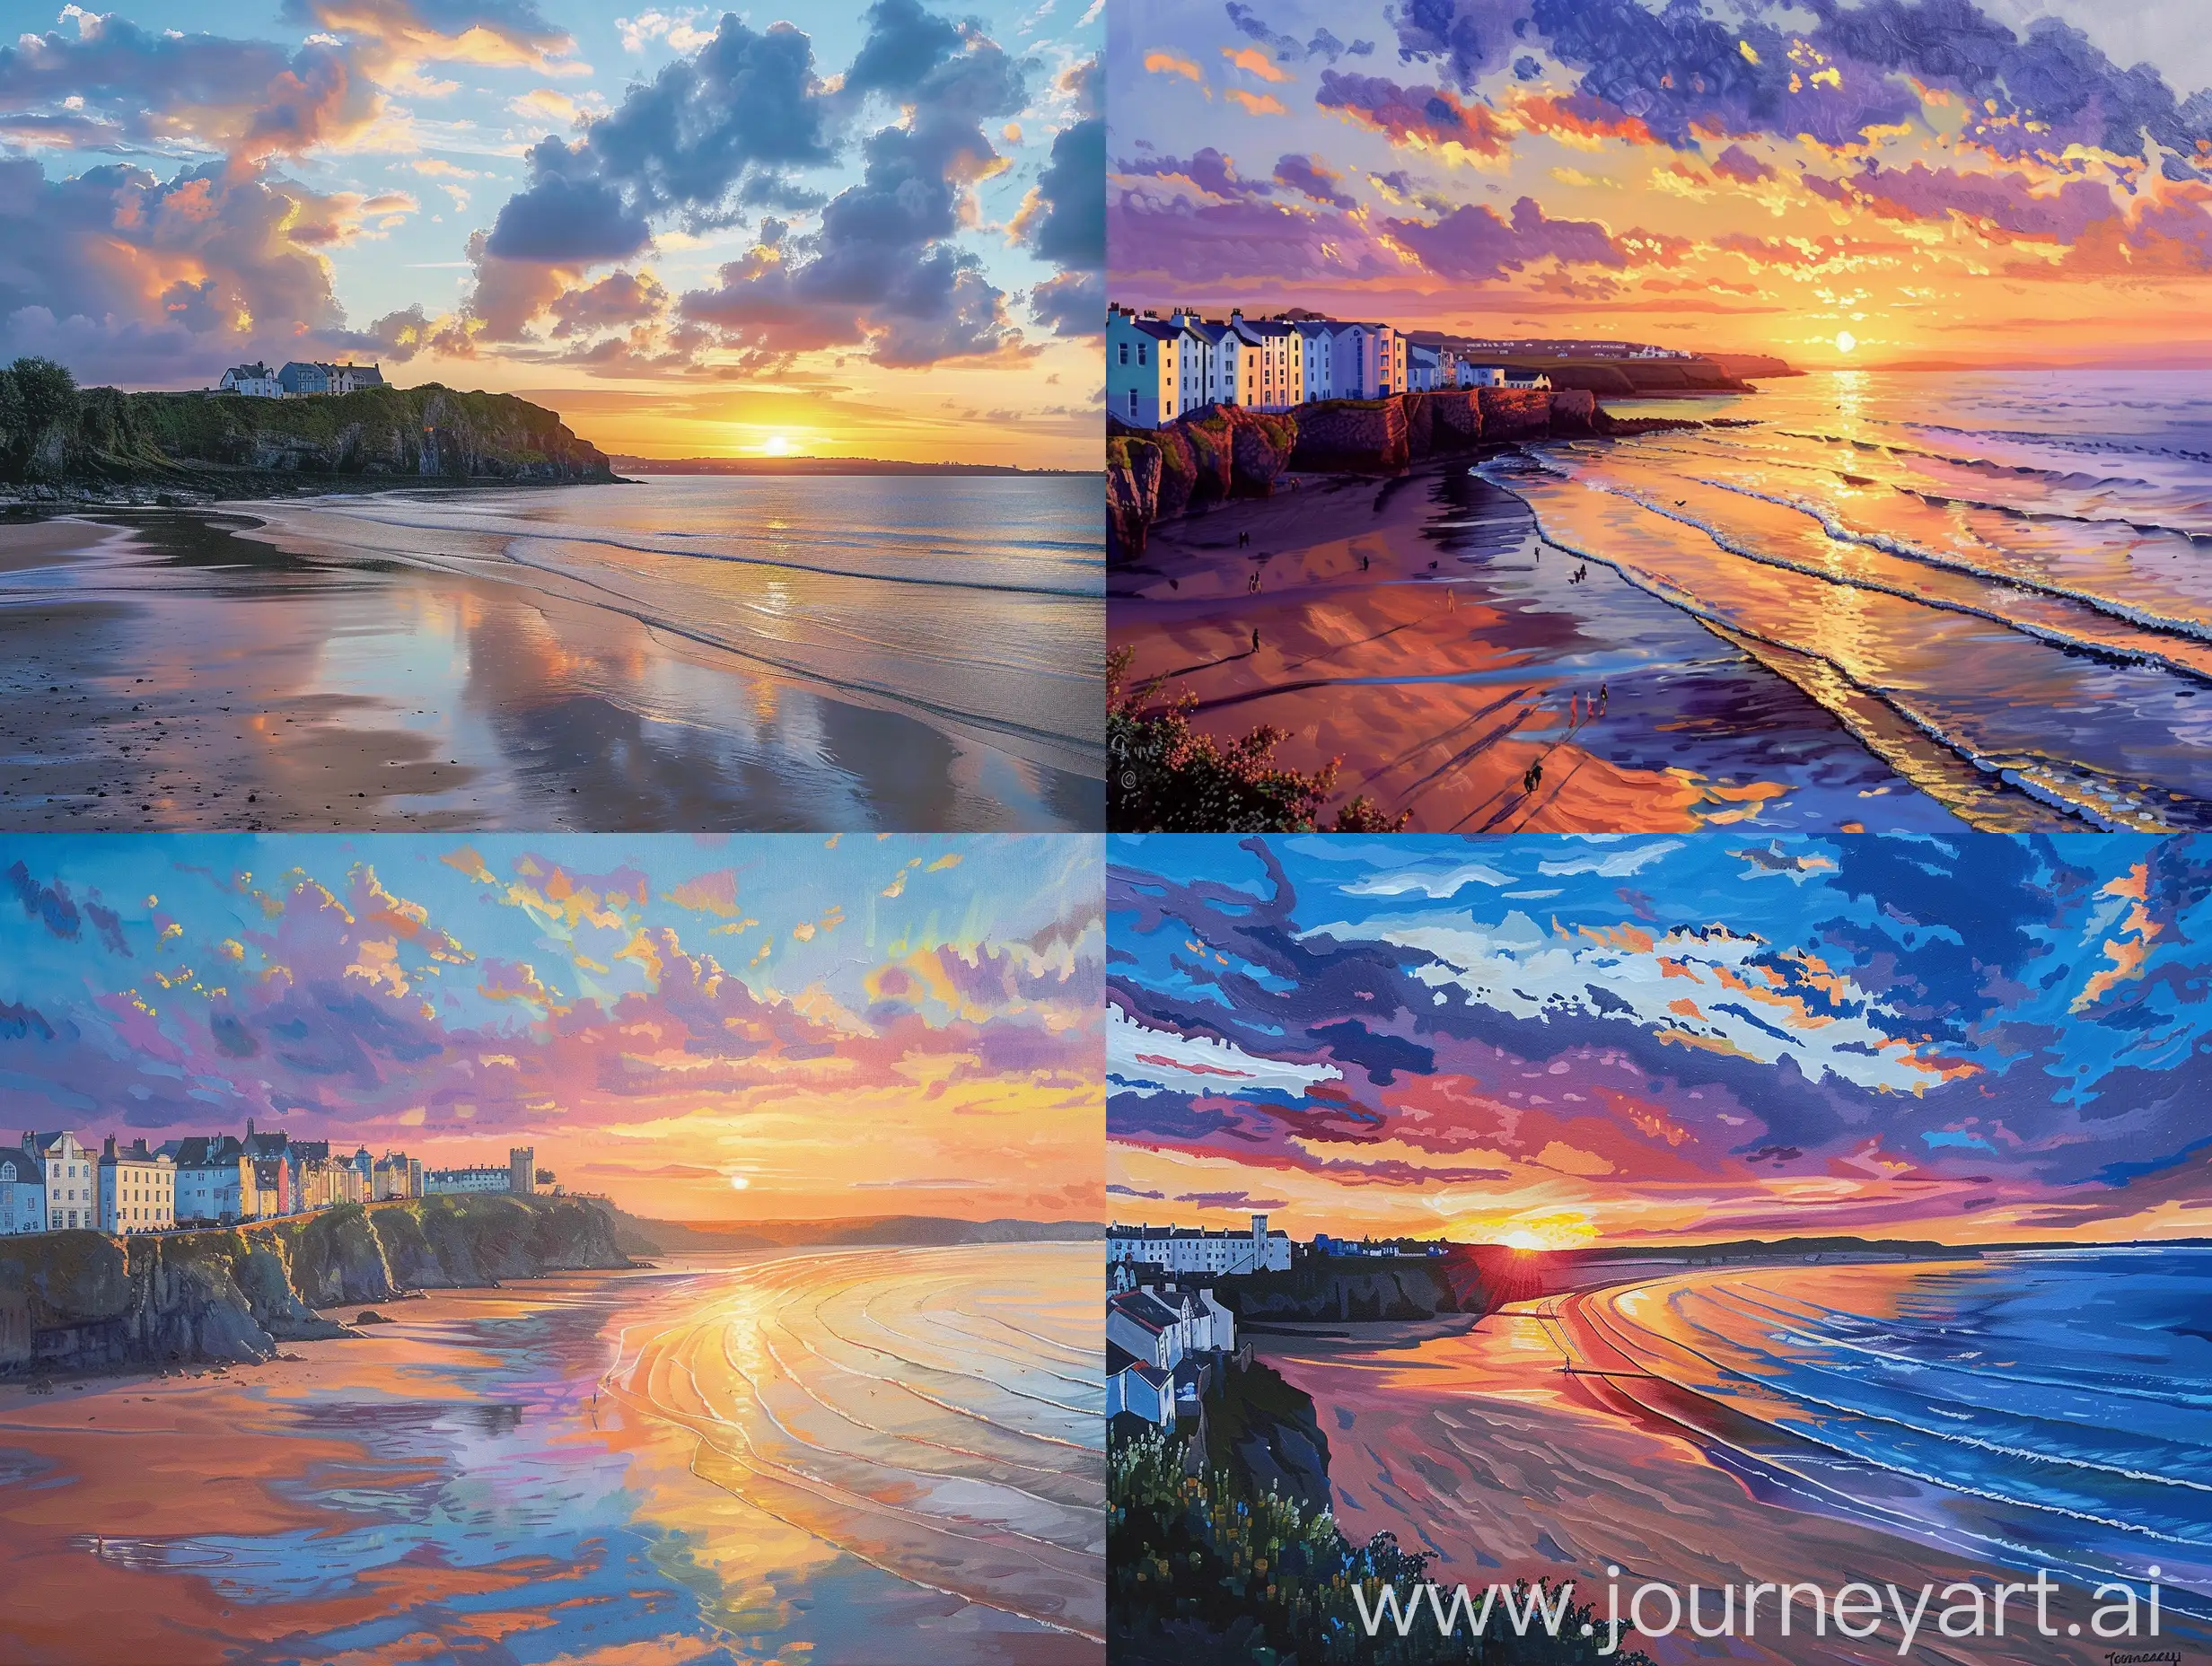 A beautiful sunset over North beach, in Tenby, Painted in the style of the artist Pierre Fix-Masseau.